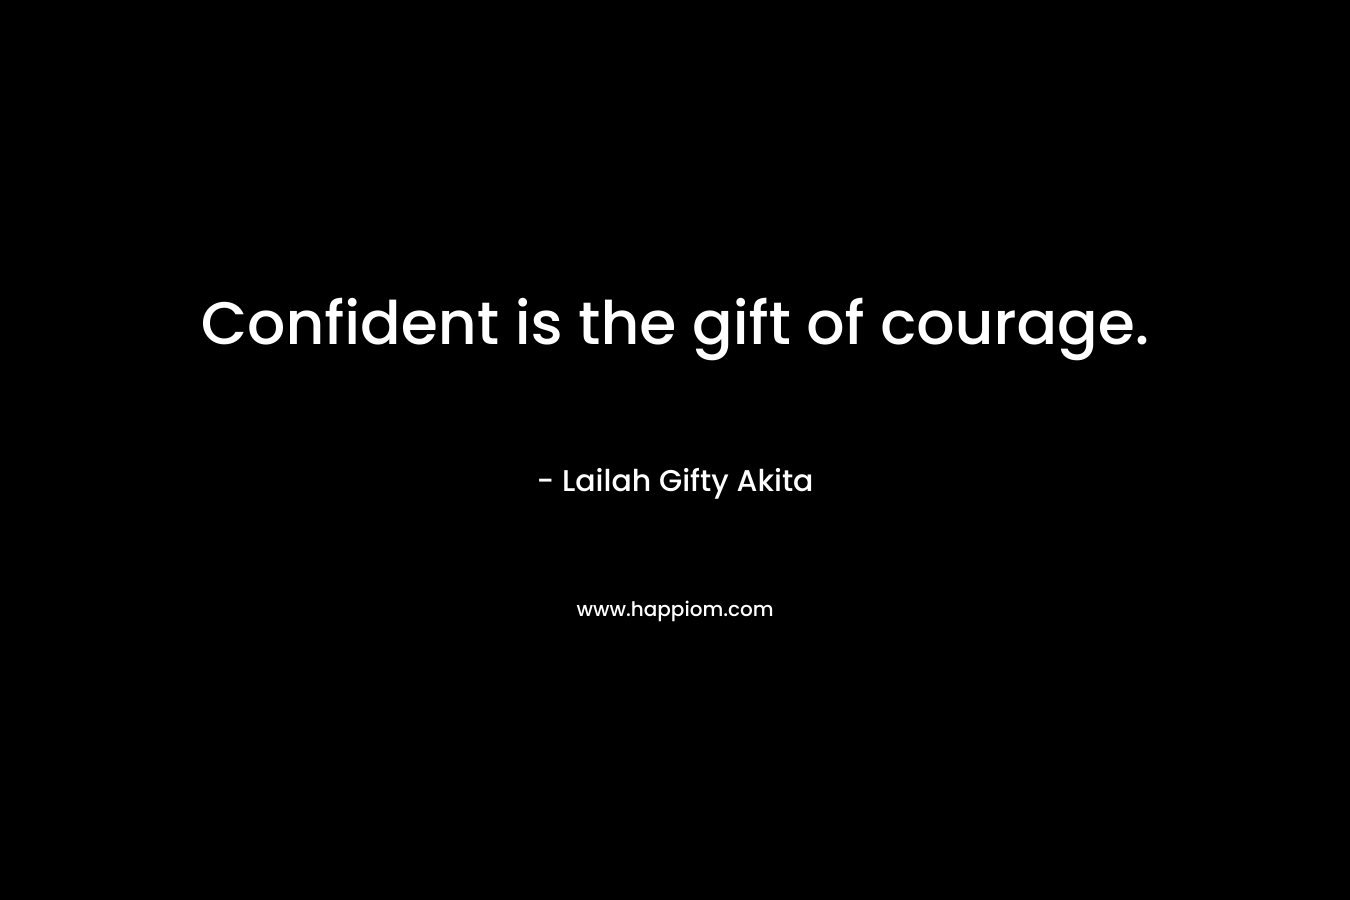 Confident is the gift of courage.